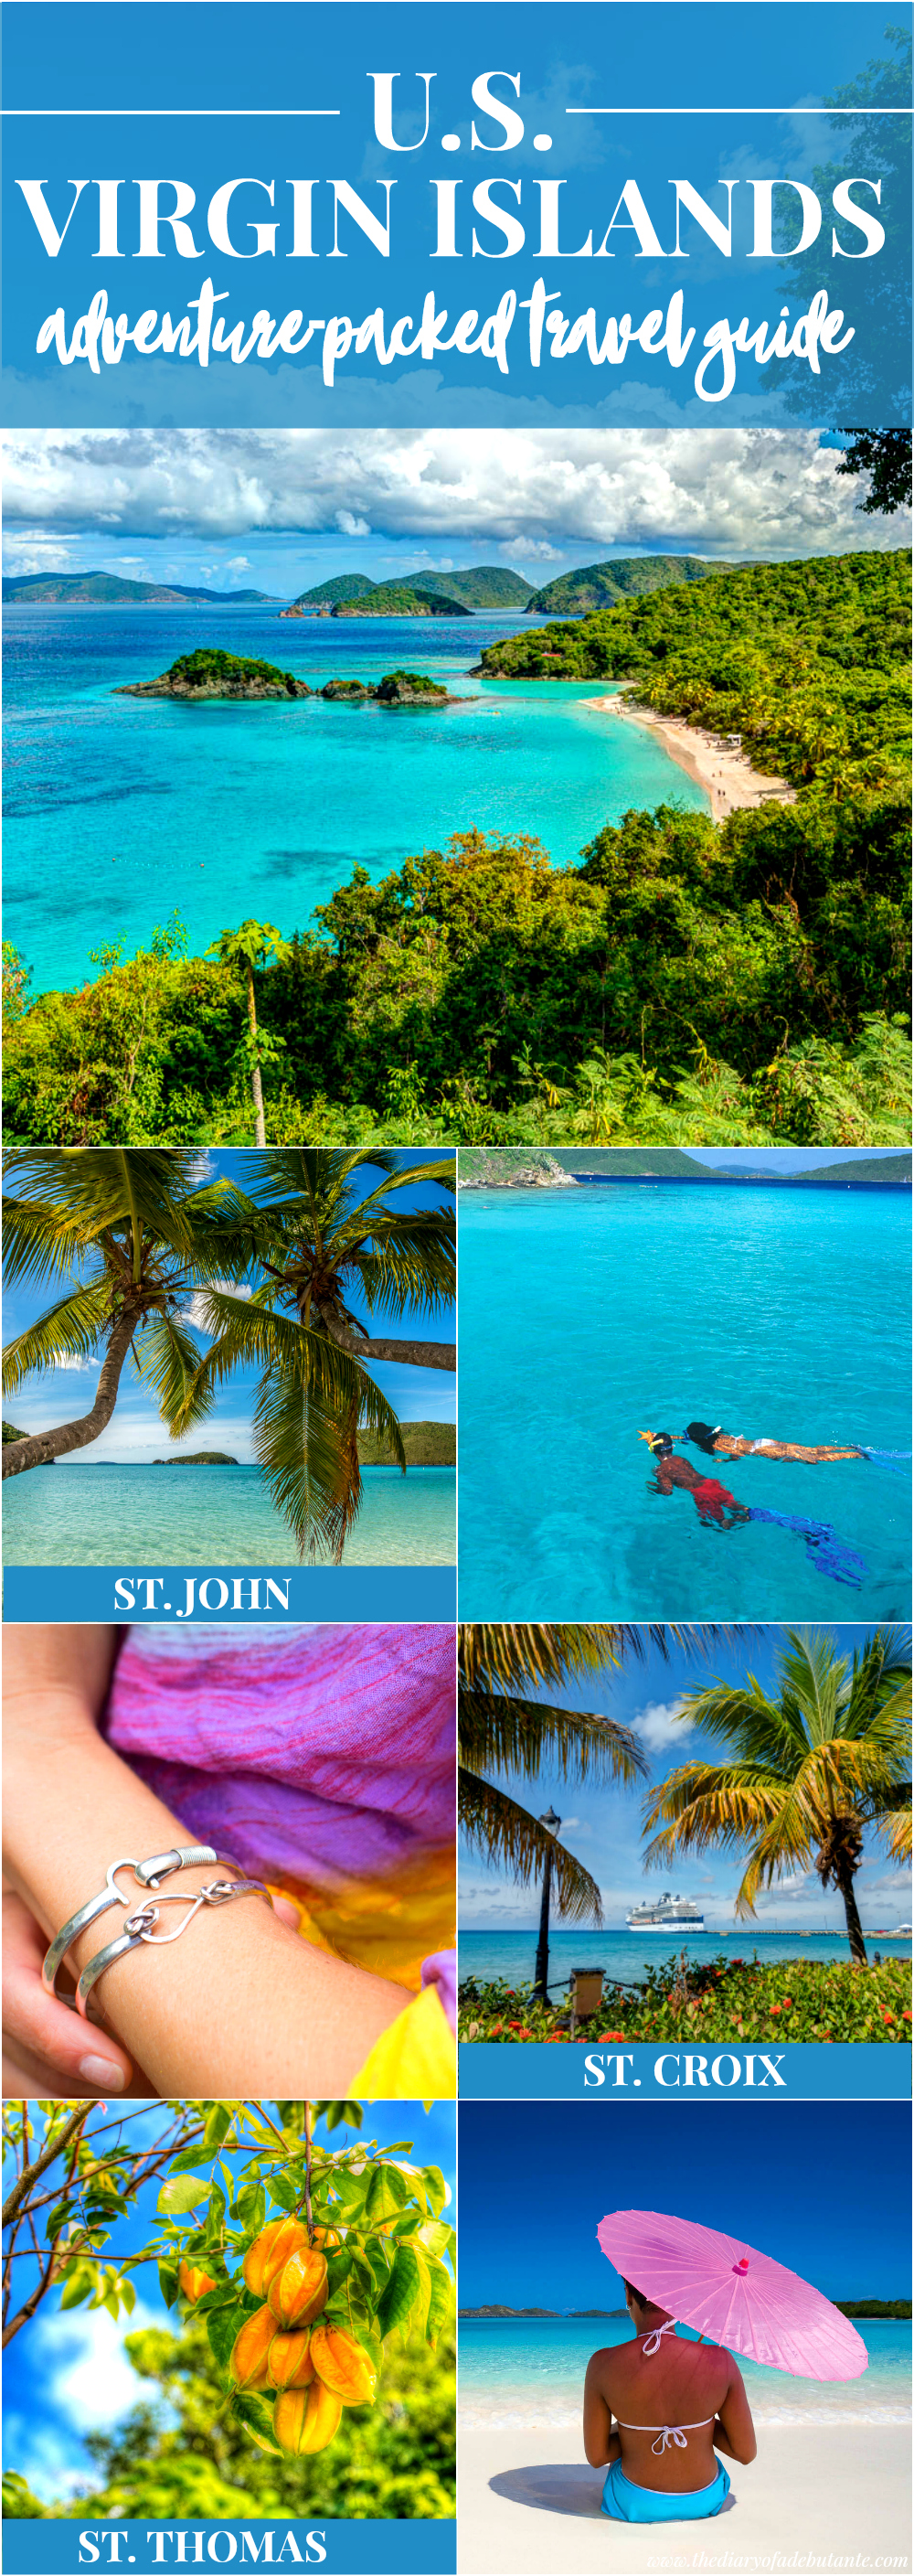 The top 10 things to do in the U.S. Virgin Islands